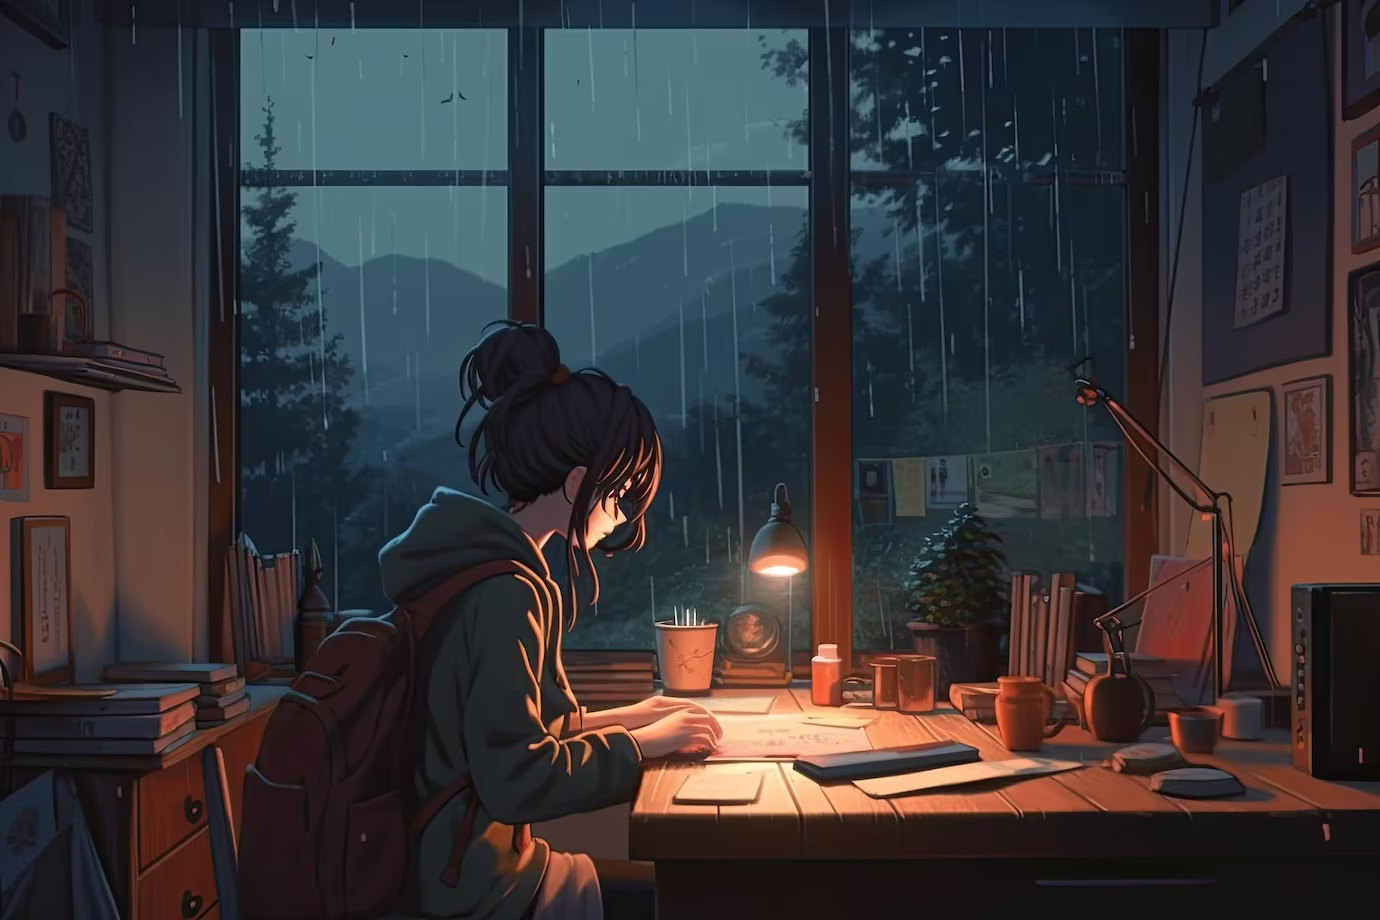 Girl studying in the rain at night.